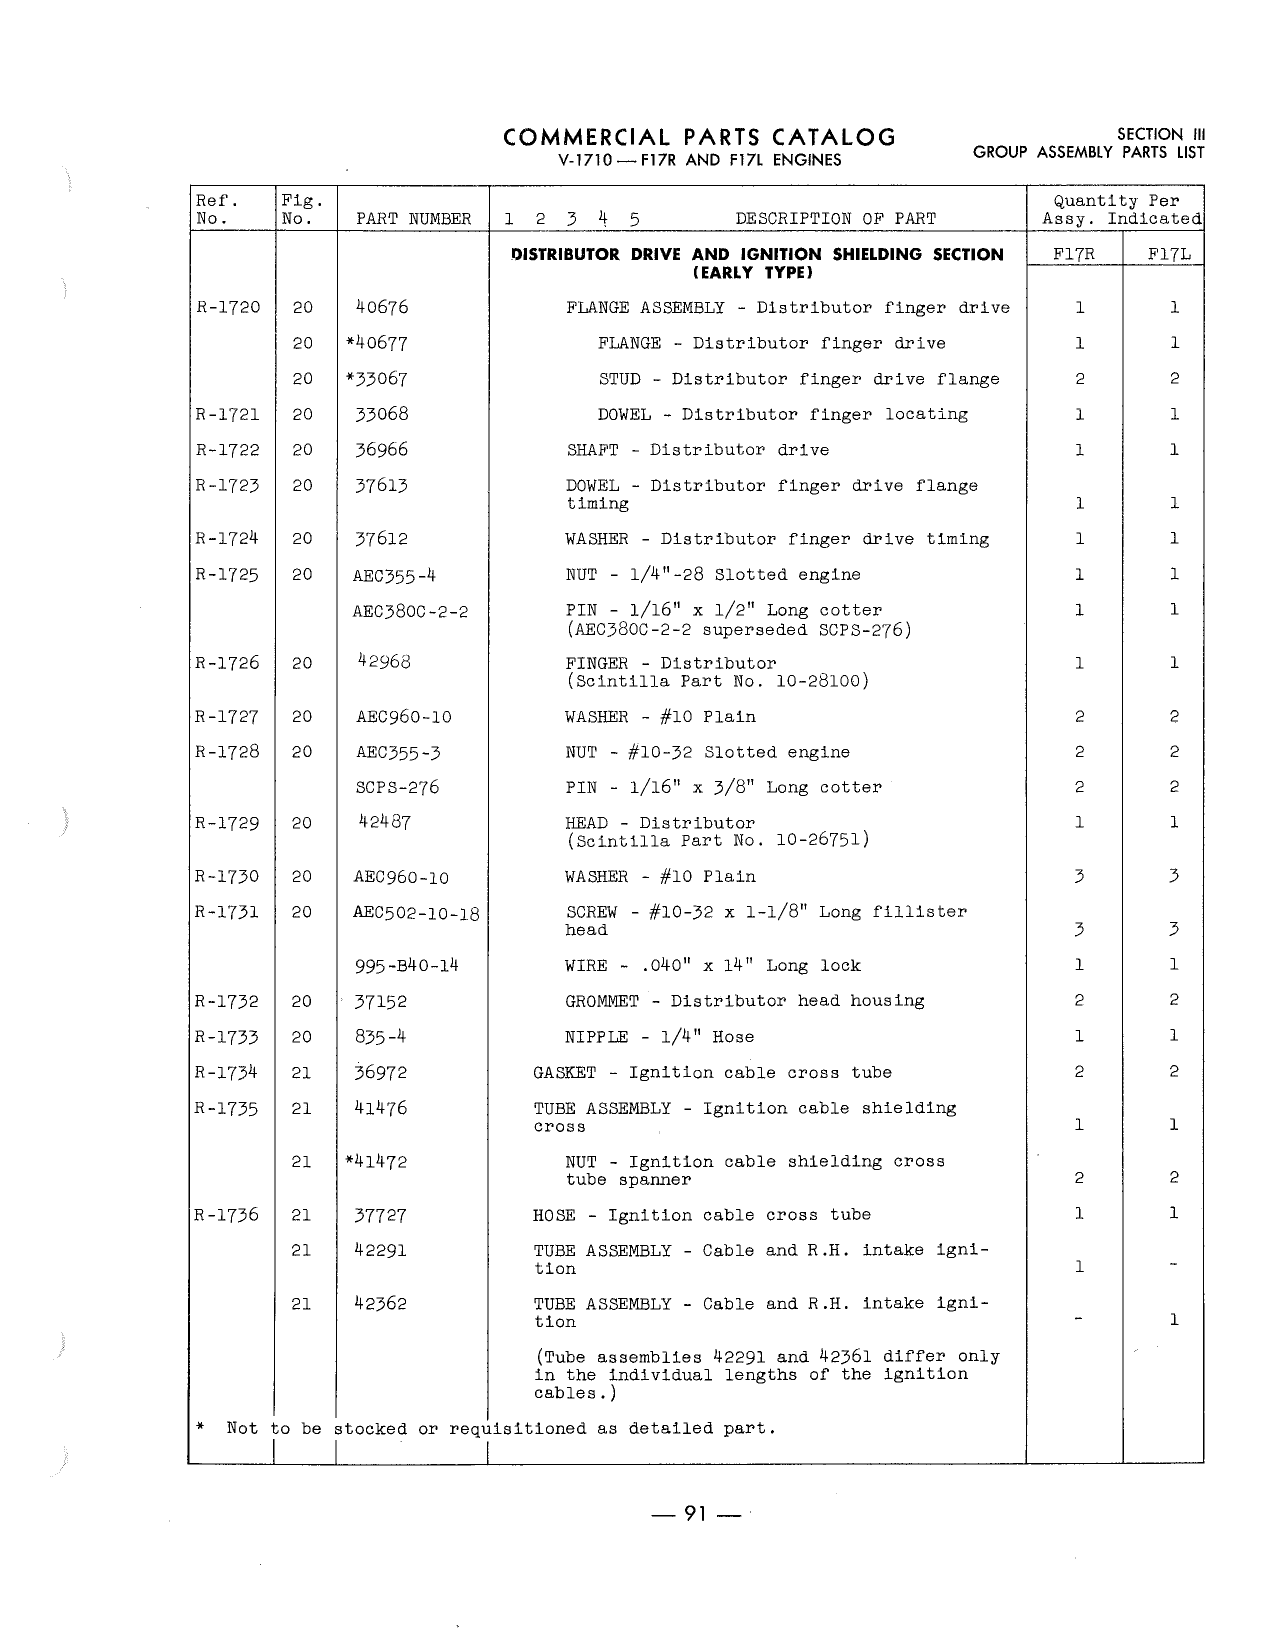 Sample page 95 from AirCorps Library document: Parts Catalog - Allison V-1710-F